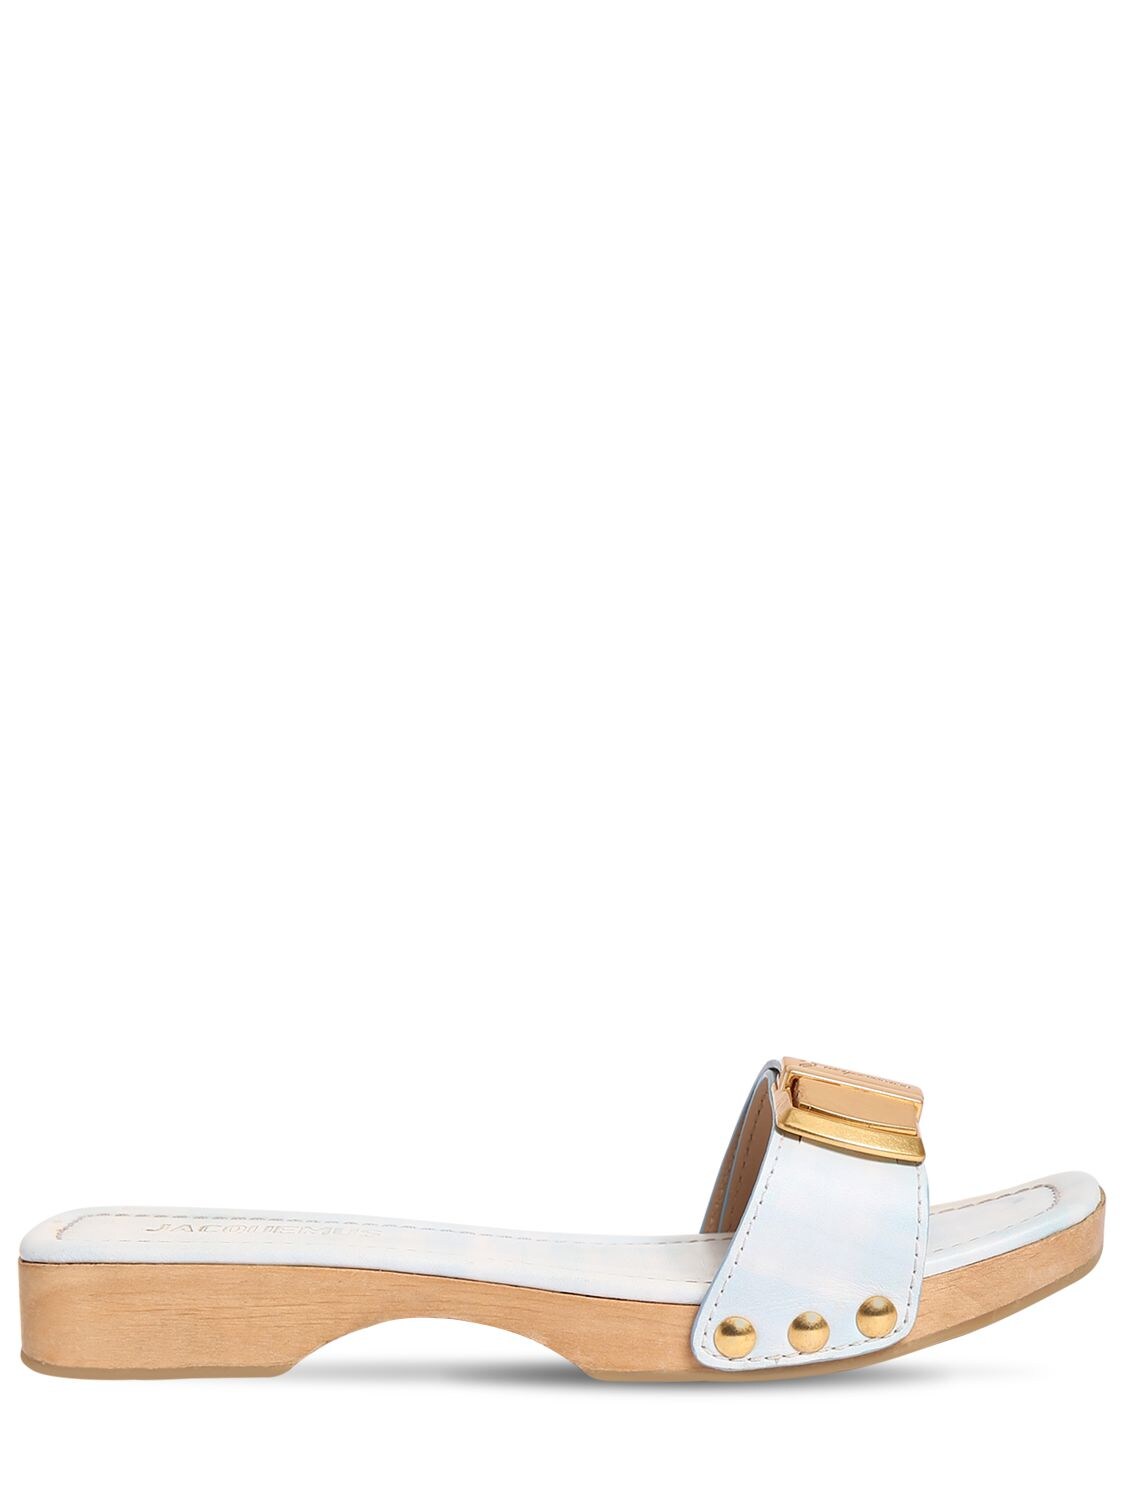 Jacquemus Les Sandales Tatanes Leather Sandals In Ivory | ModeSens